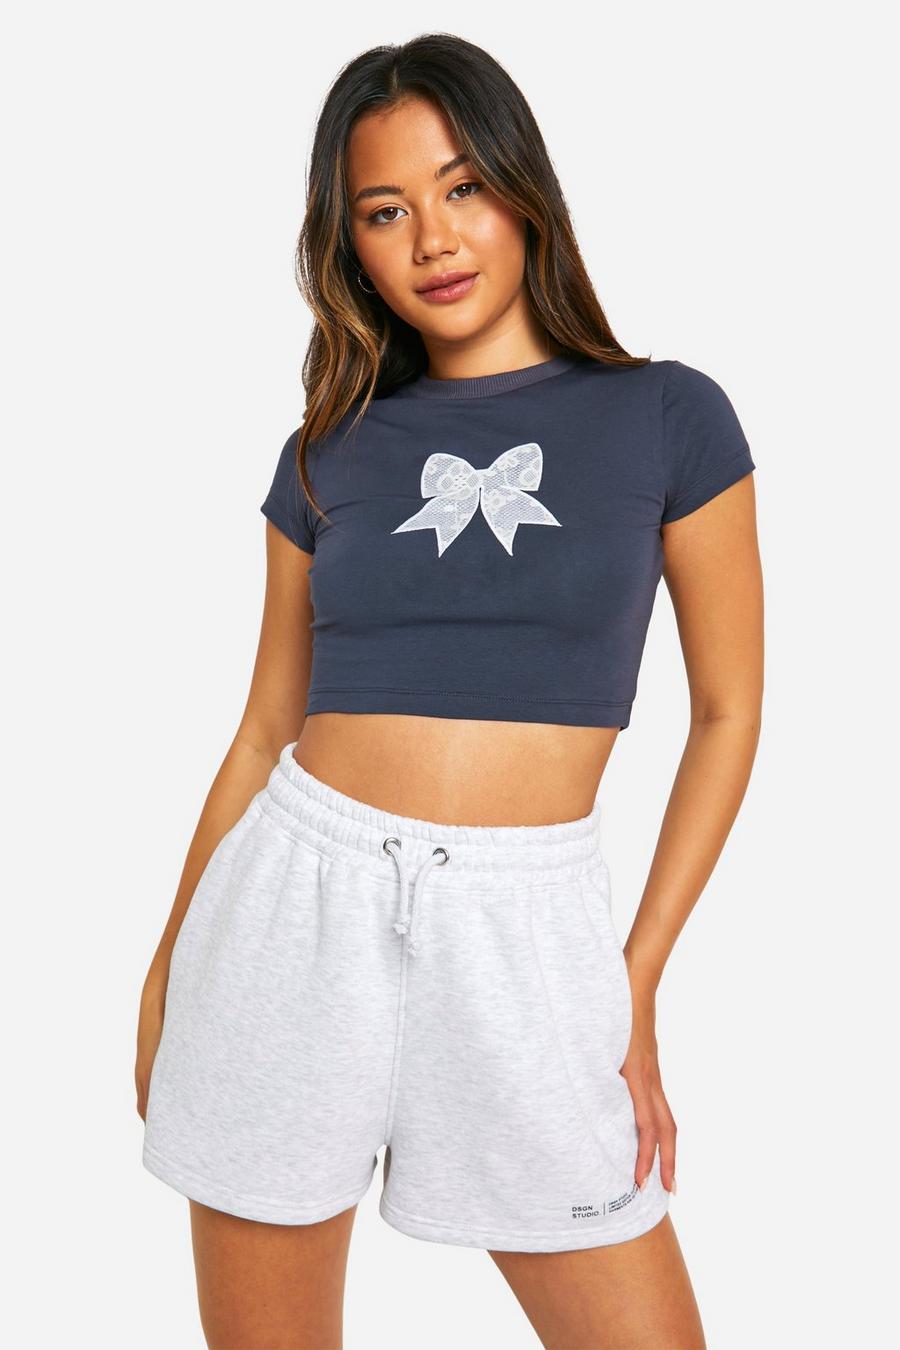 Navy Lace Applique Bow Front Tee